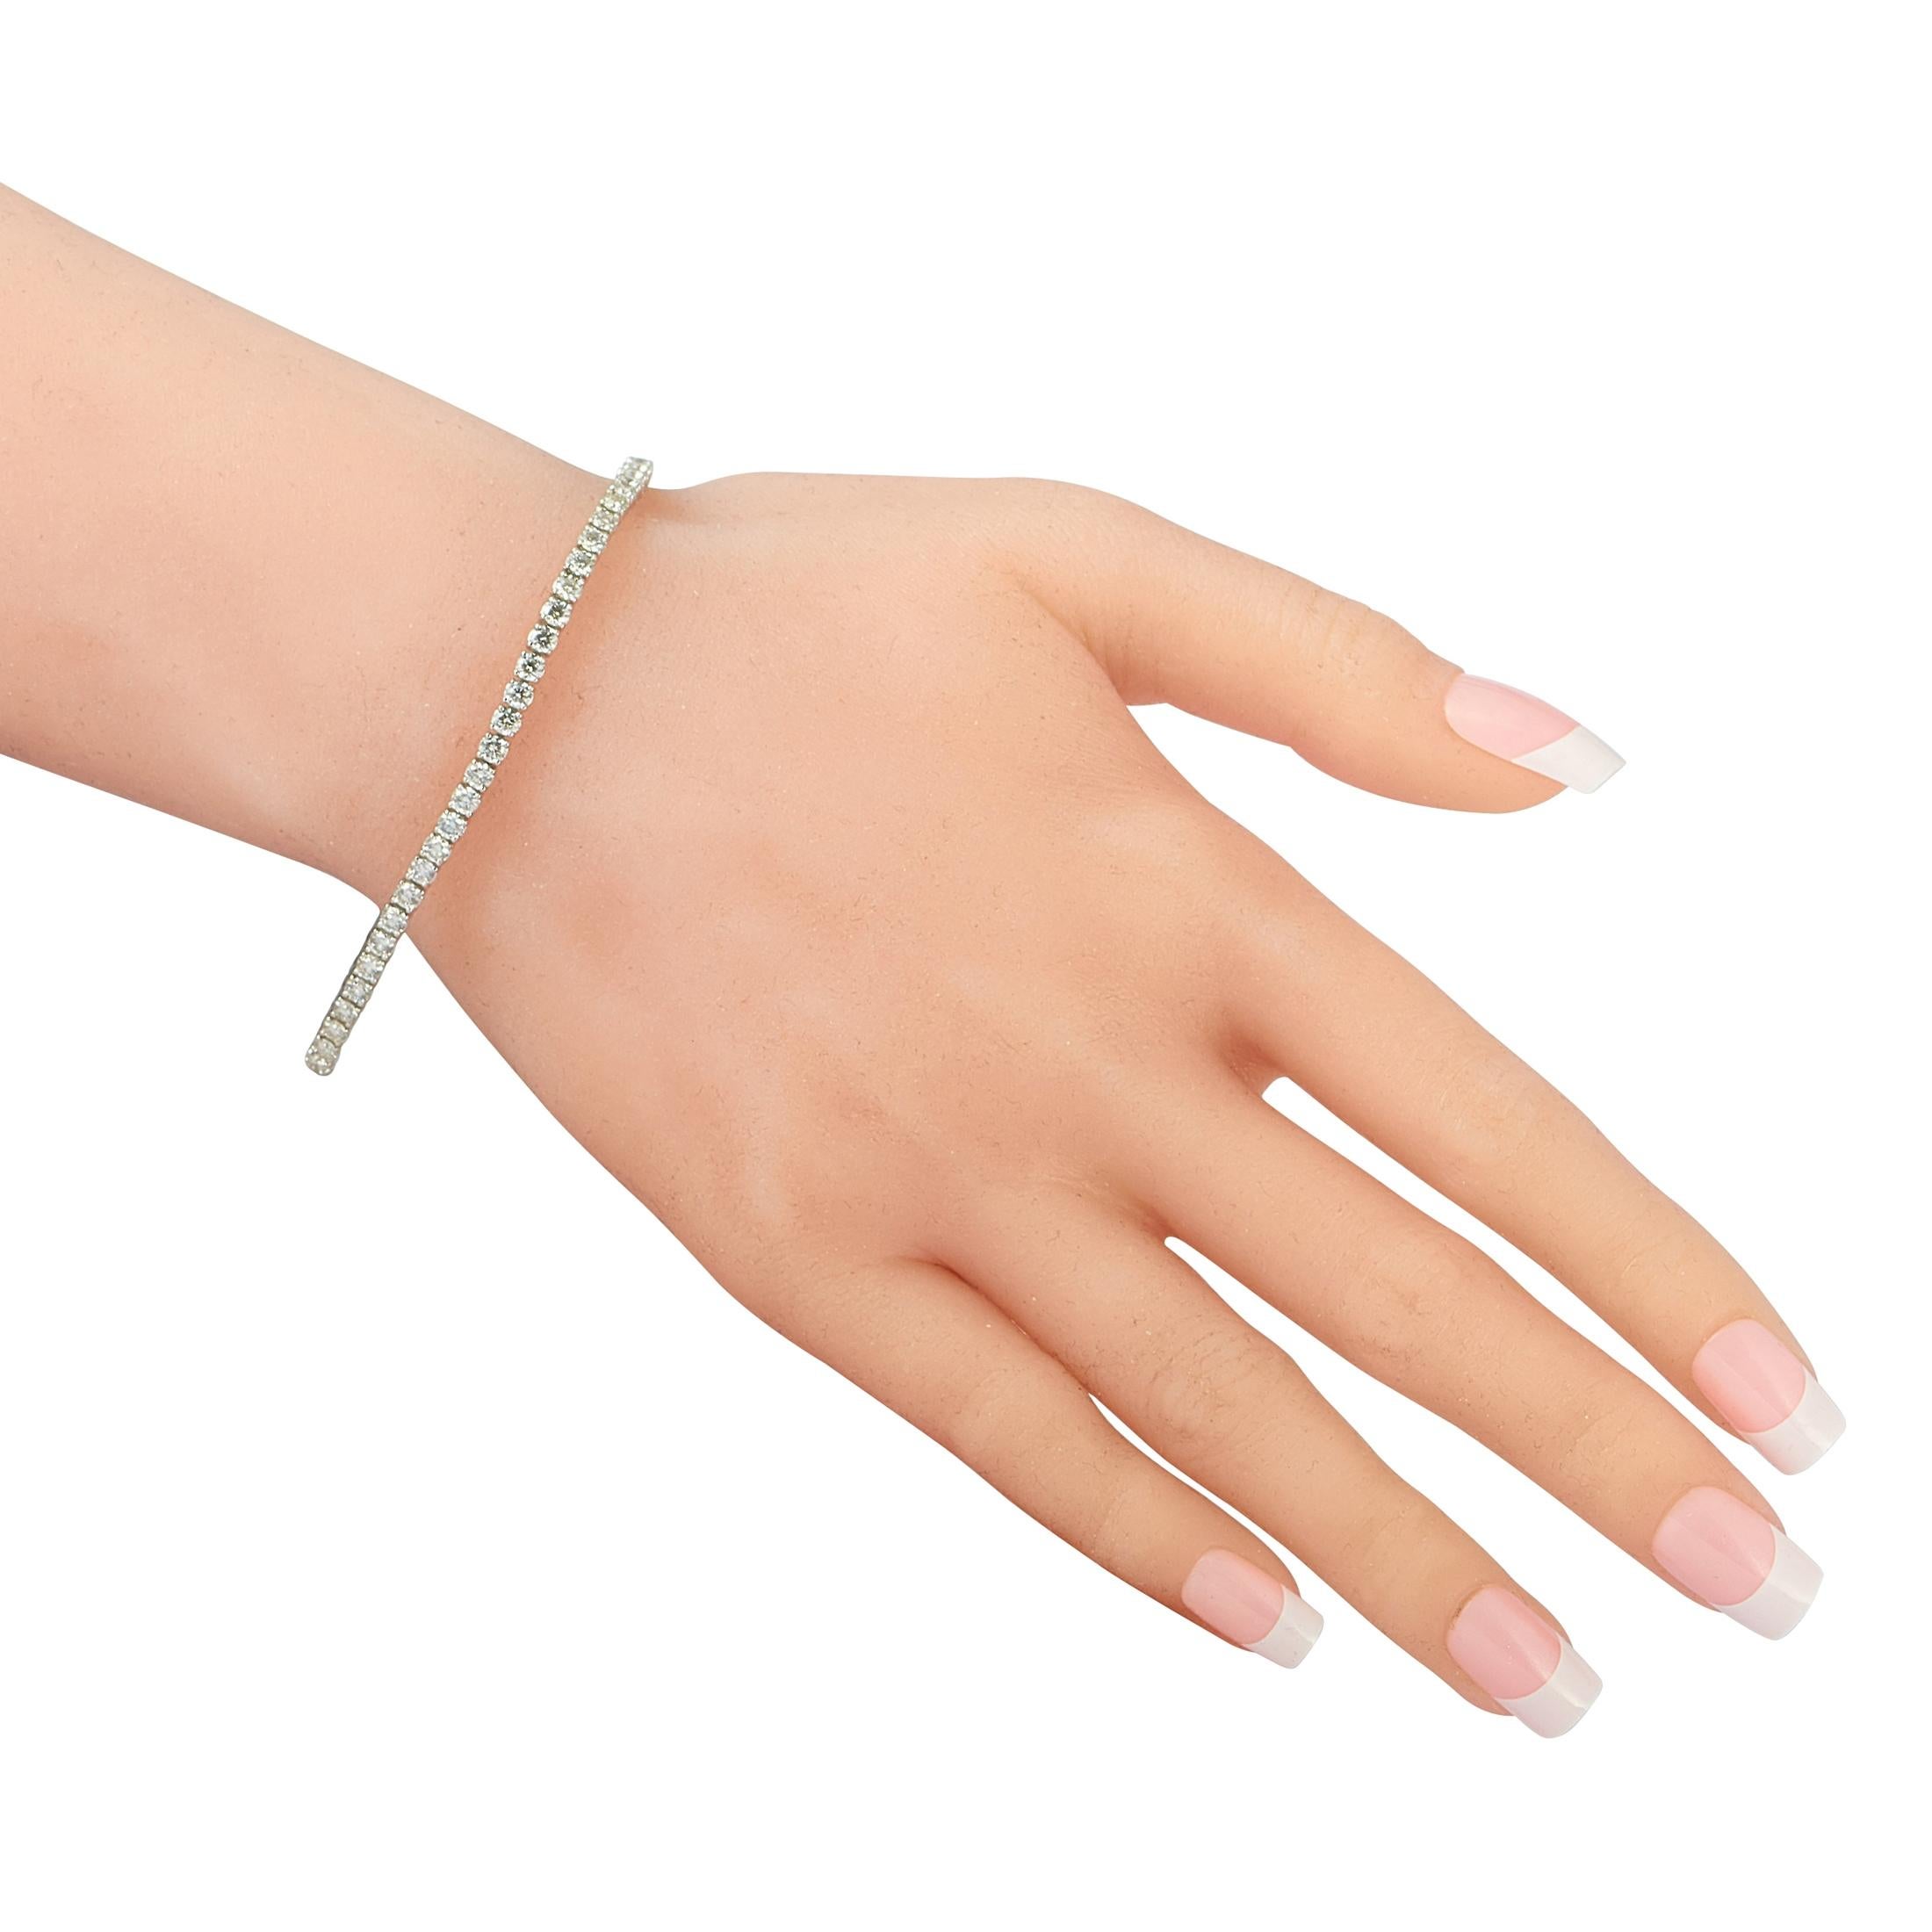 This LB Exclusive bracelet is crafted from 14K white gold and weighs 9.1 grams, measuring 7.37” in length. The bracelet is set with diamonds that total 5.65 carats.
 
 Offered in brand new condition, this item includes a gift box.